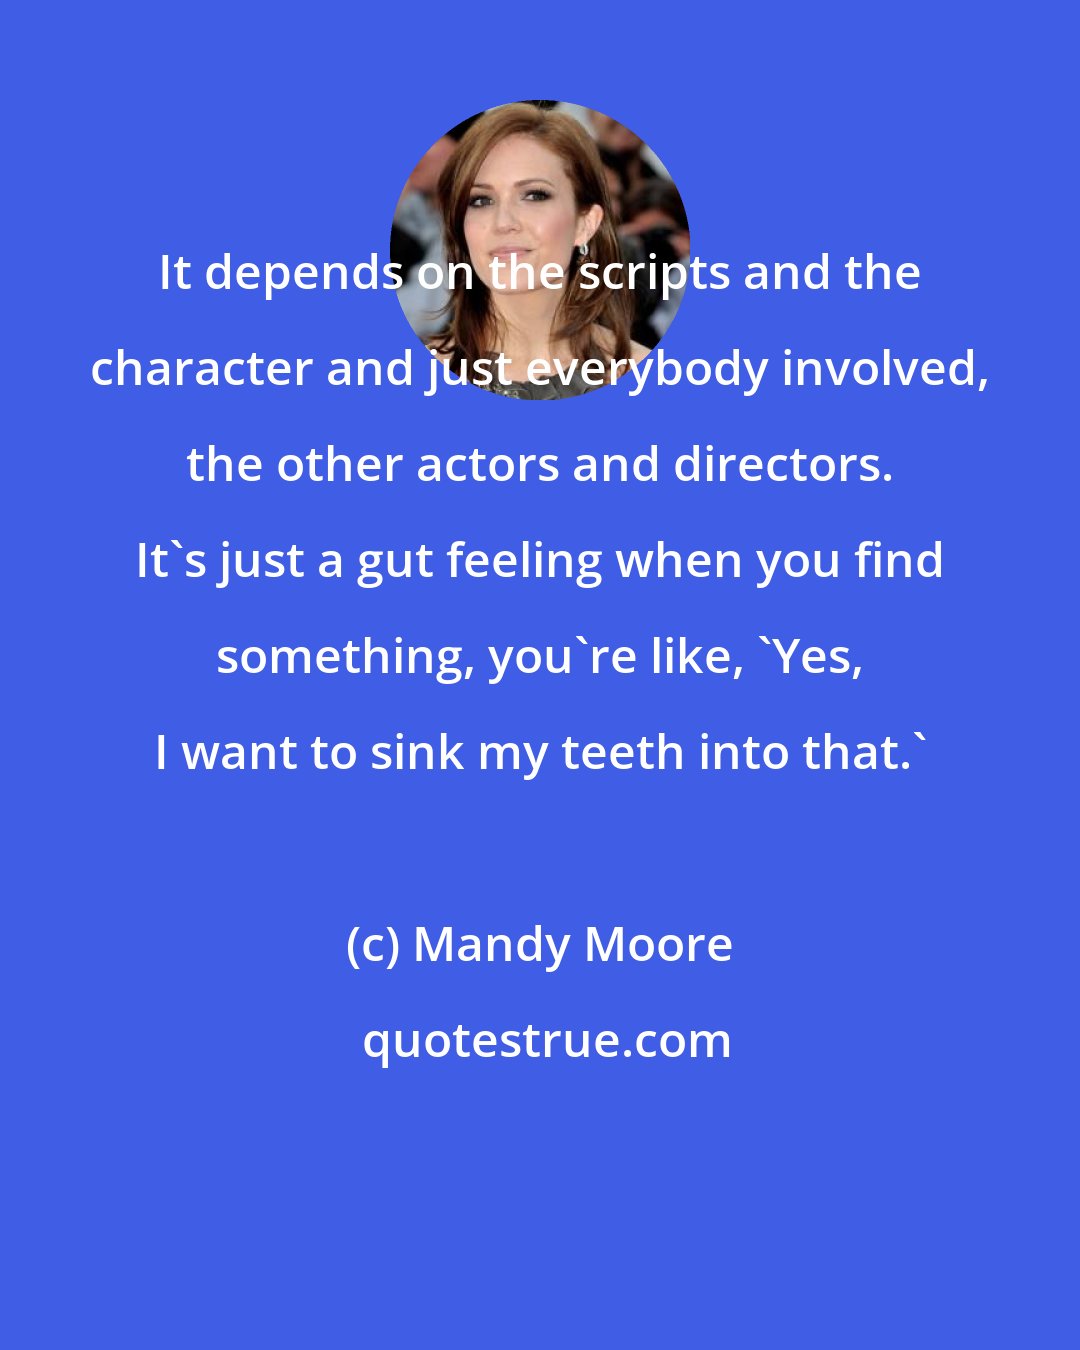 Mandy Moore: It depends on the scripts and the character and just everybody involved, the other actors and directors. It's just a gut feeling when you find something, you're like, 'Yes, I want to sink my teeth into that.'